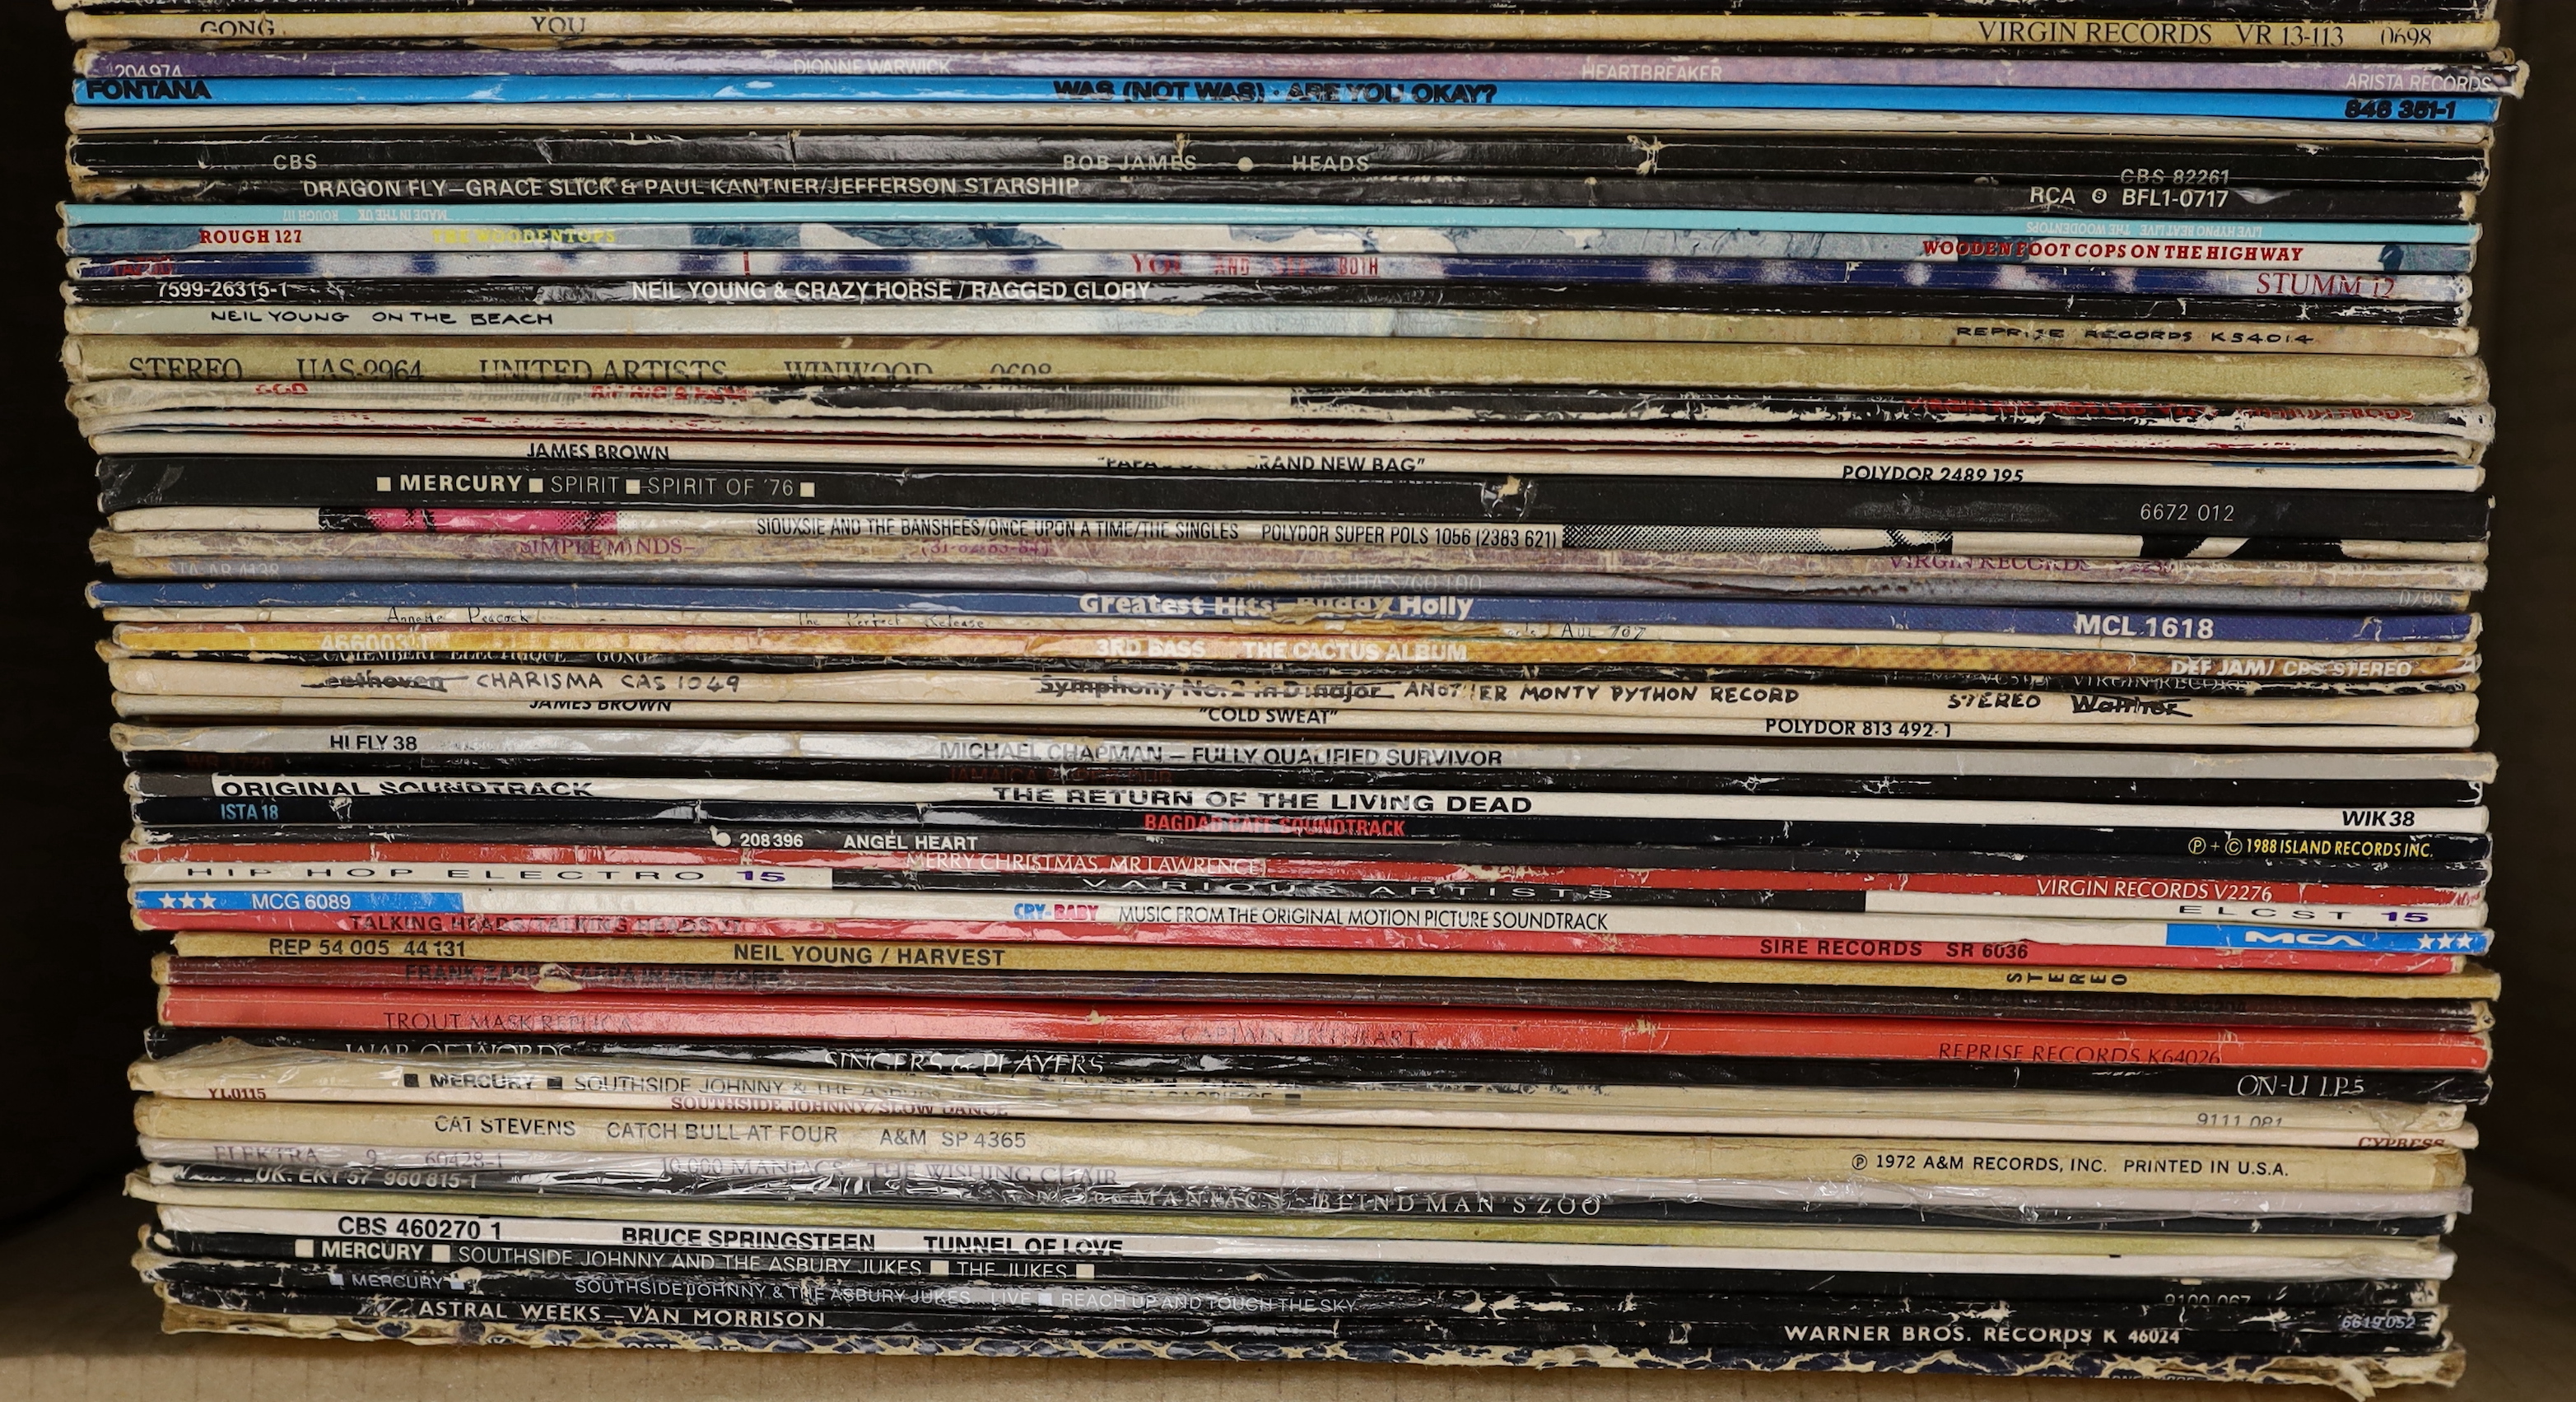 Seventy mostly 1970's/80's LPs, including Focus, Steve Forbert, Aretha Franklin, Dionne Warwick, Dire Straits, Simple Minds, Neil Young, Bruce Springsteen, etc.